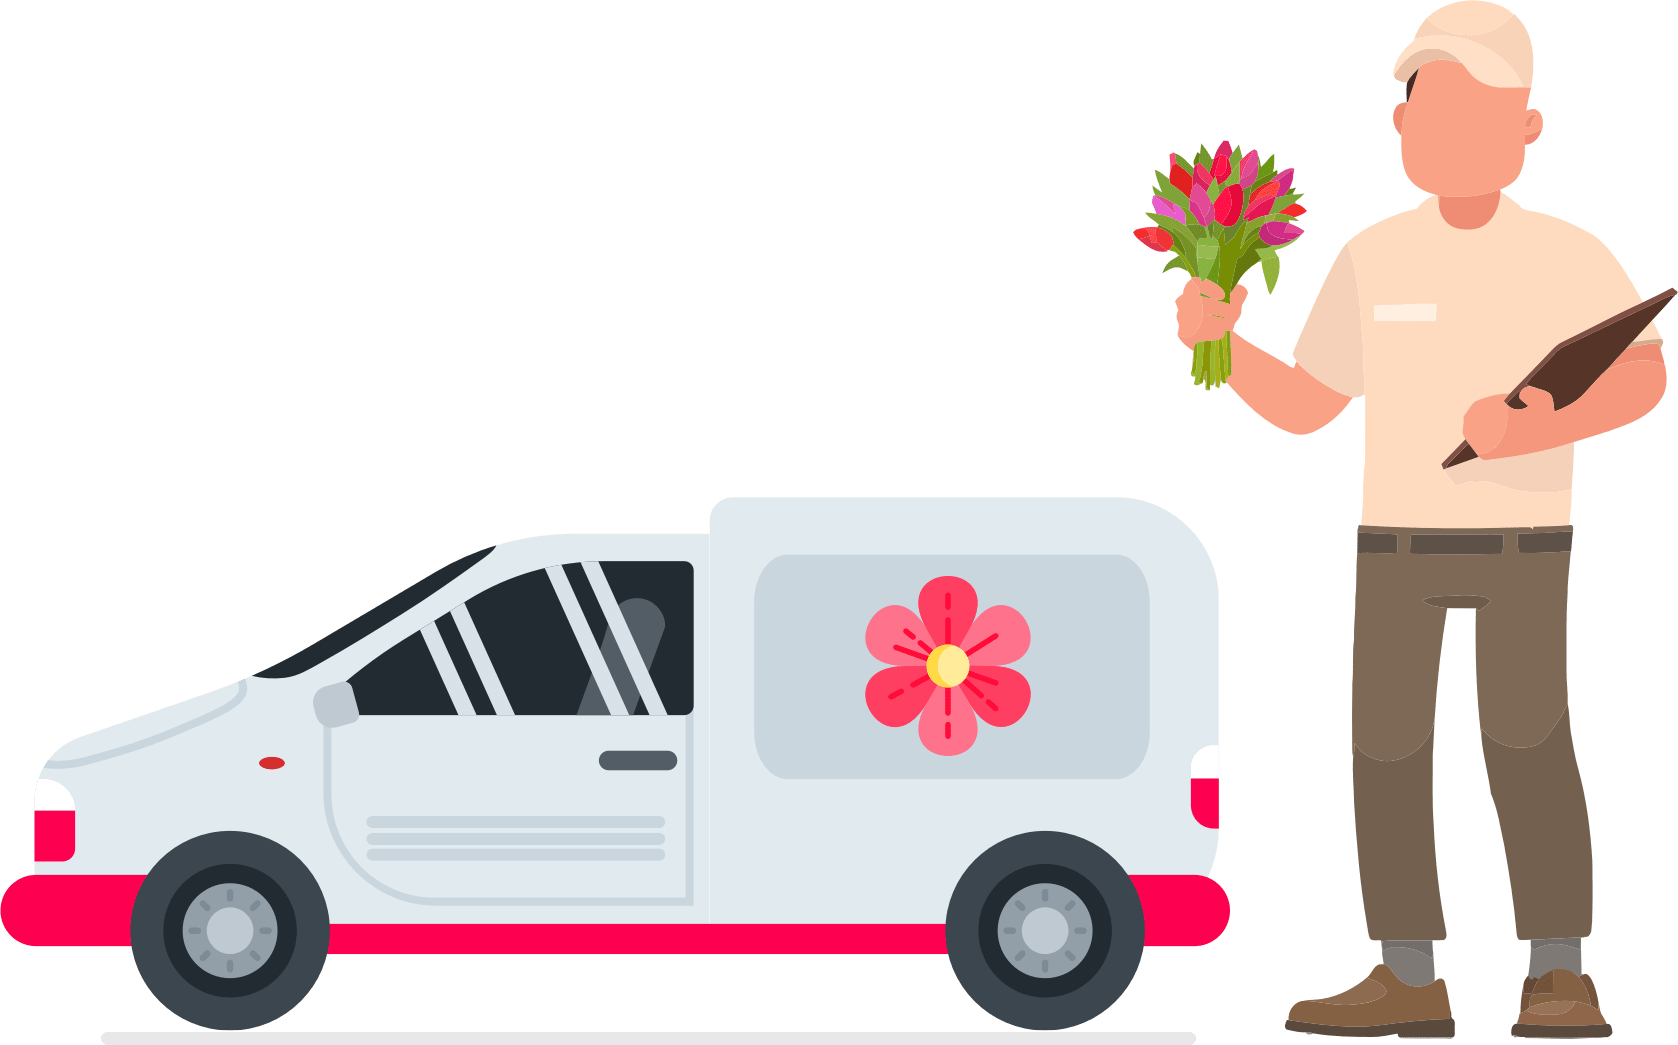 Release the effective ways to solve the online flower delivery business issue